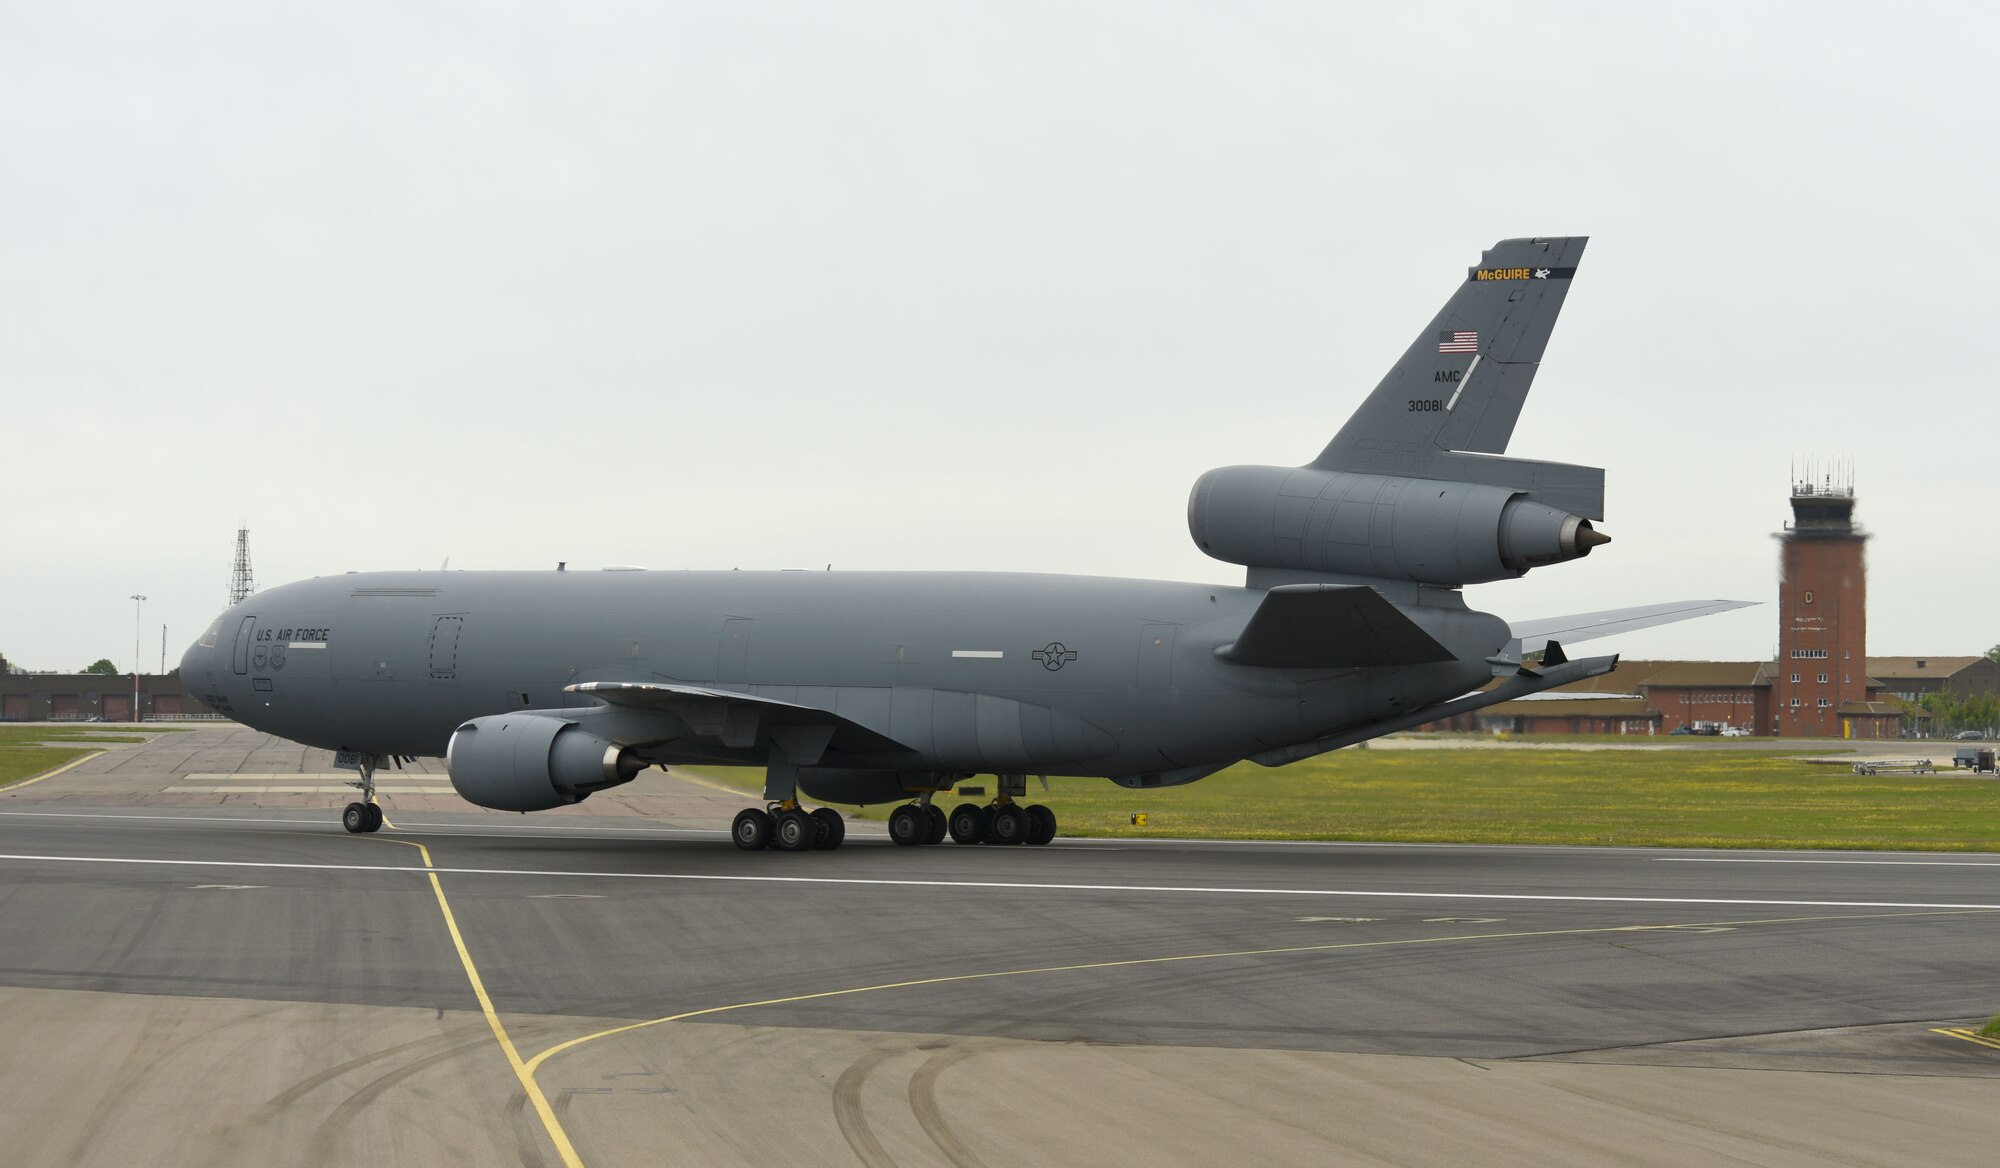 A U.S. Air Force KC-10 Extender aircraft taxis down the runway during an elephant walk with a KC-135 Stratotanker aircraft and a Royal Air Force A330 Voyager aircraft May 20, 2021, at RAF Mildenhall, England. The elephant walk was part of the European Tanker Symposium which brings tanker crew from NATO countries, along with other U.S. and Canadian forces together to share experiences and knowledge. (U.S. Air Force photo by Karen Abeyasekere)